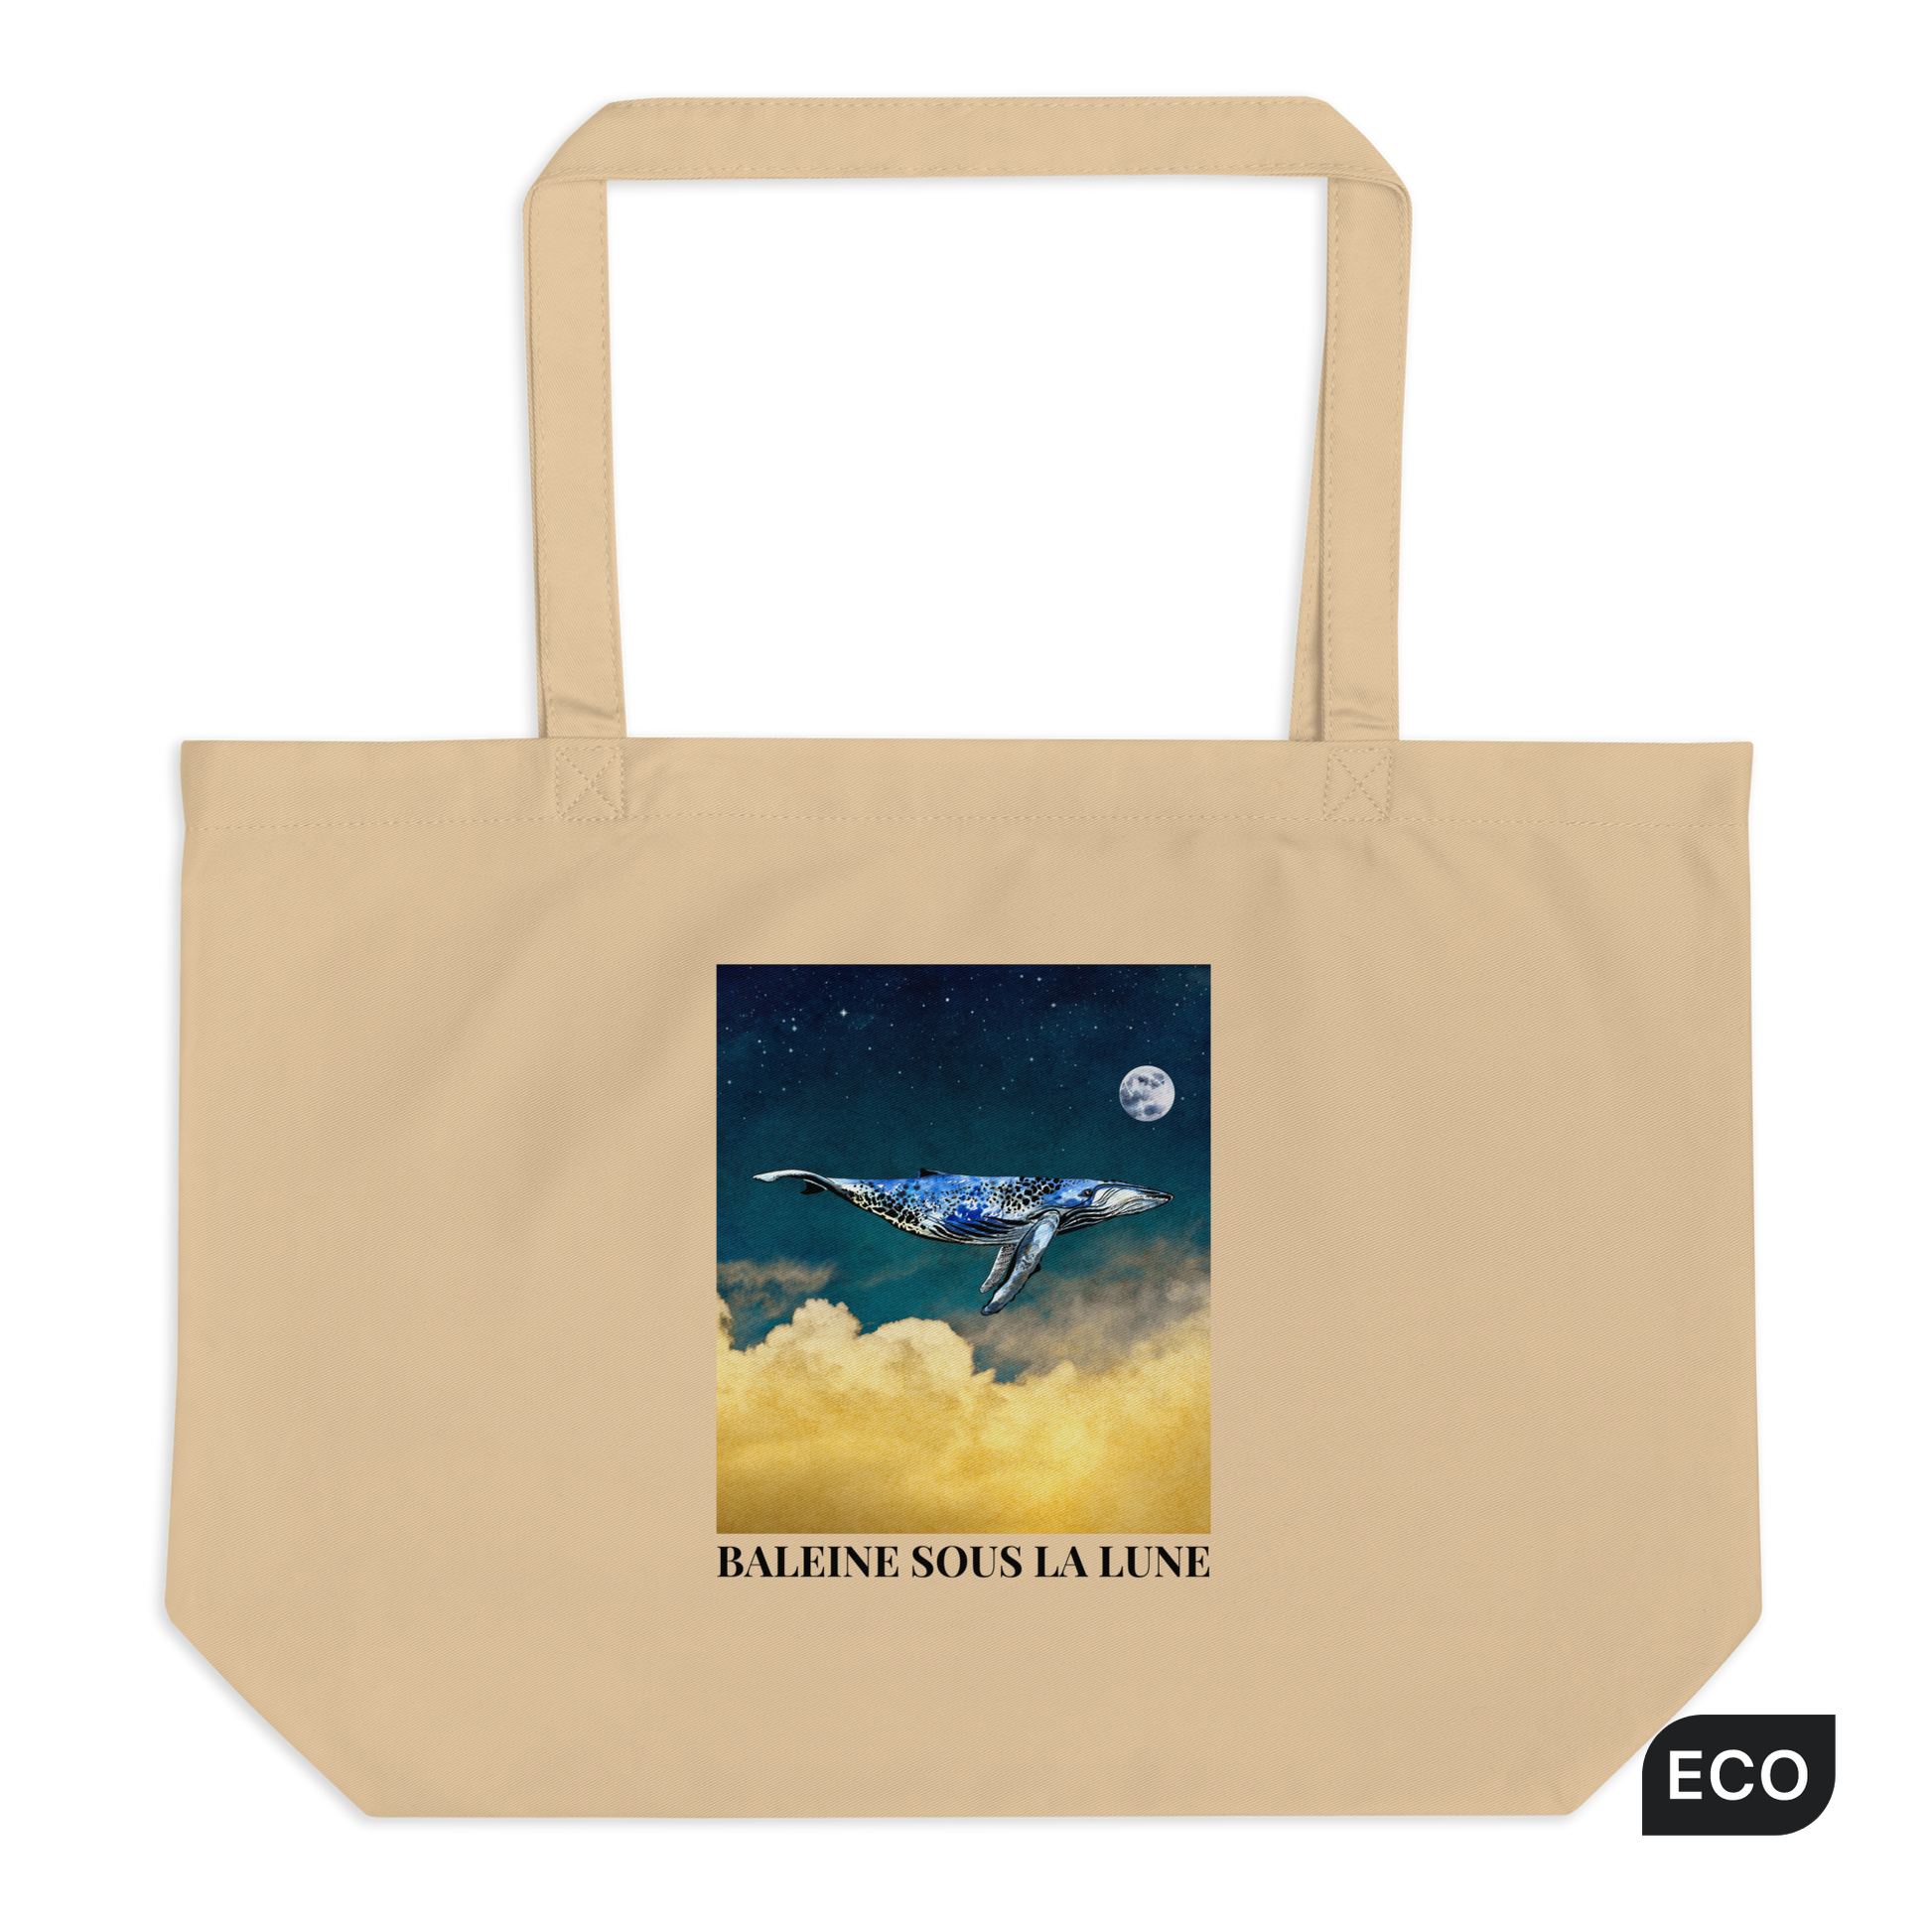 Oyster Colored Whale Eco Tote Bag featuring a majestic Whale Under The Moon graphic - Shop Large Organic Cotton Tote Bags Online - Boozy Fox